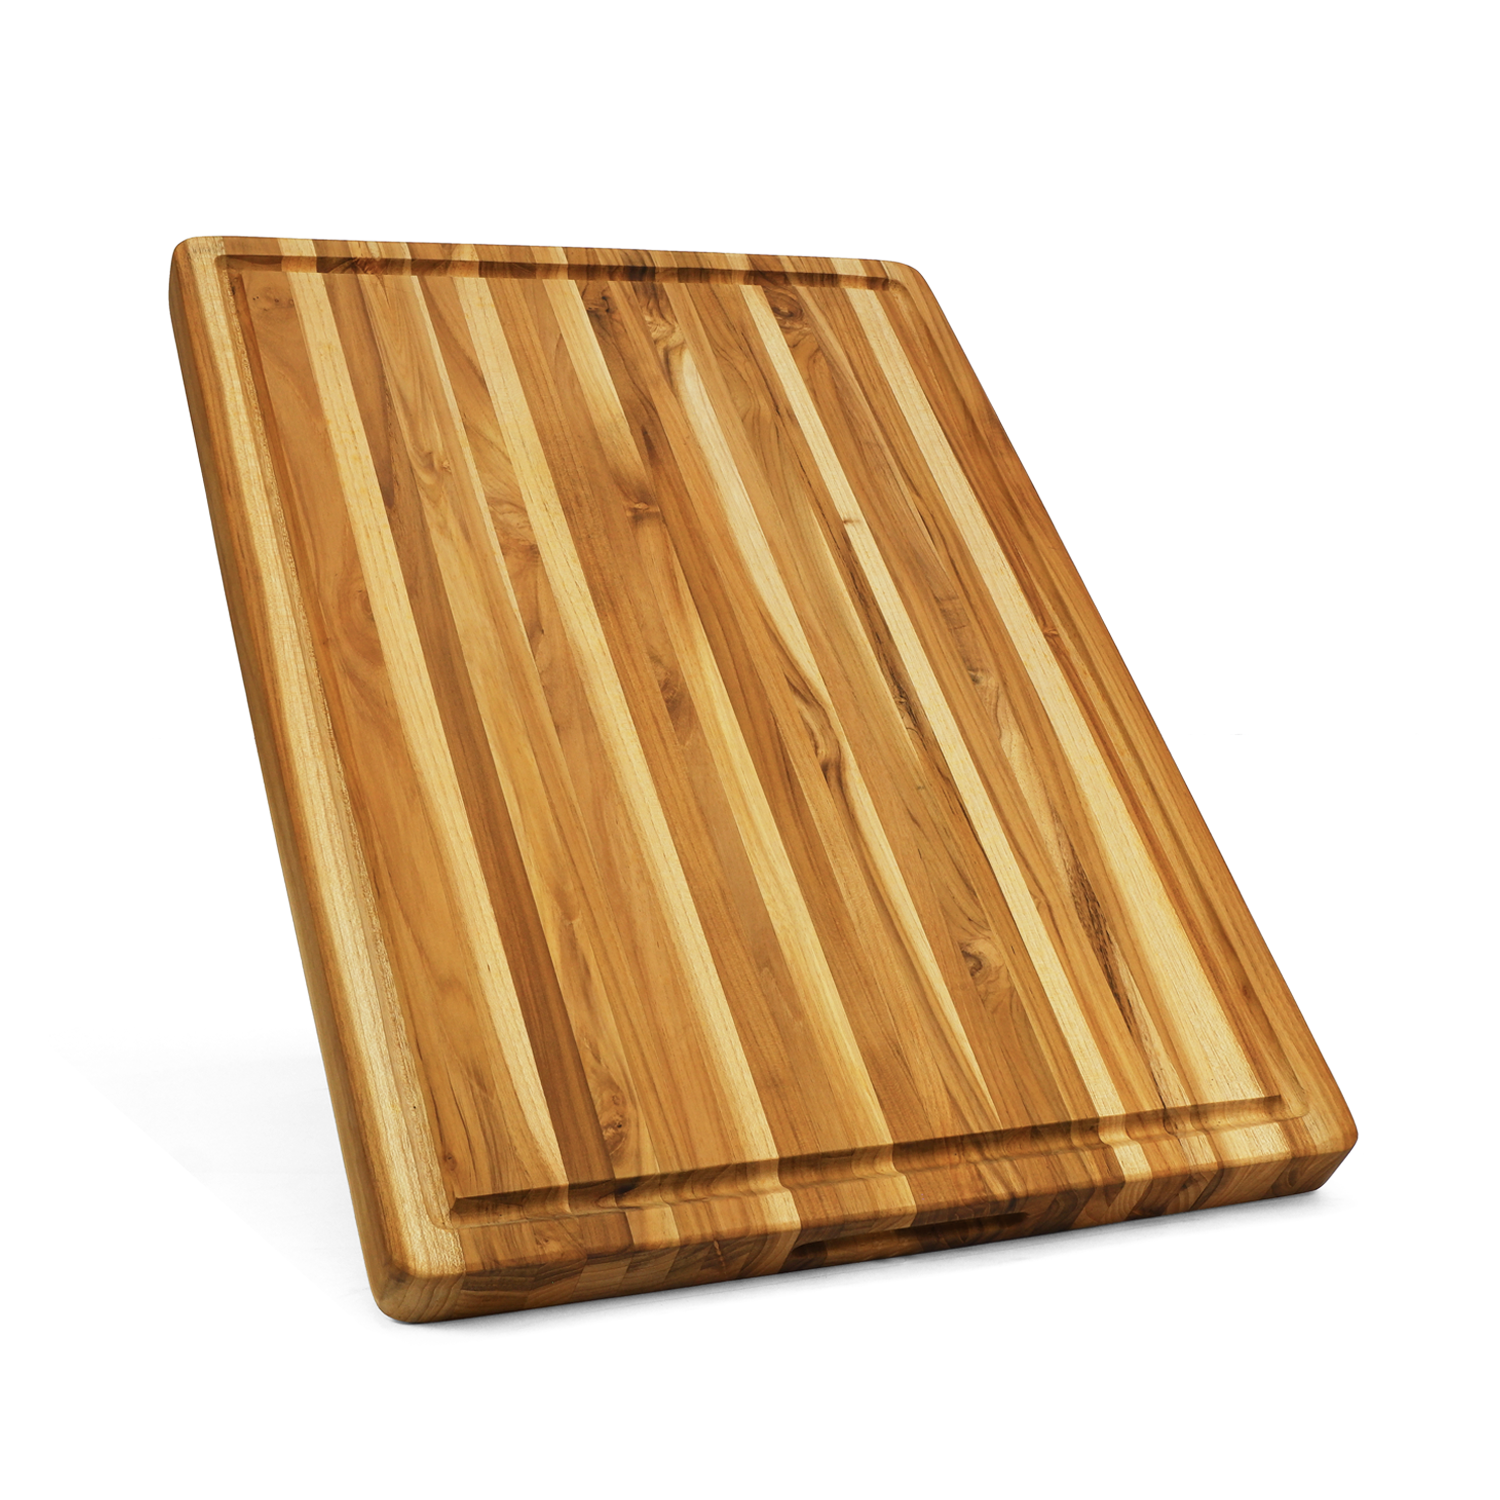 BEEFURNI Rectangular Real Teak Wood Cutting Board With Juice Groove 22 INCH, Pack of 5 Pieces-Boyel Living